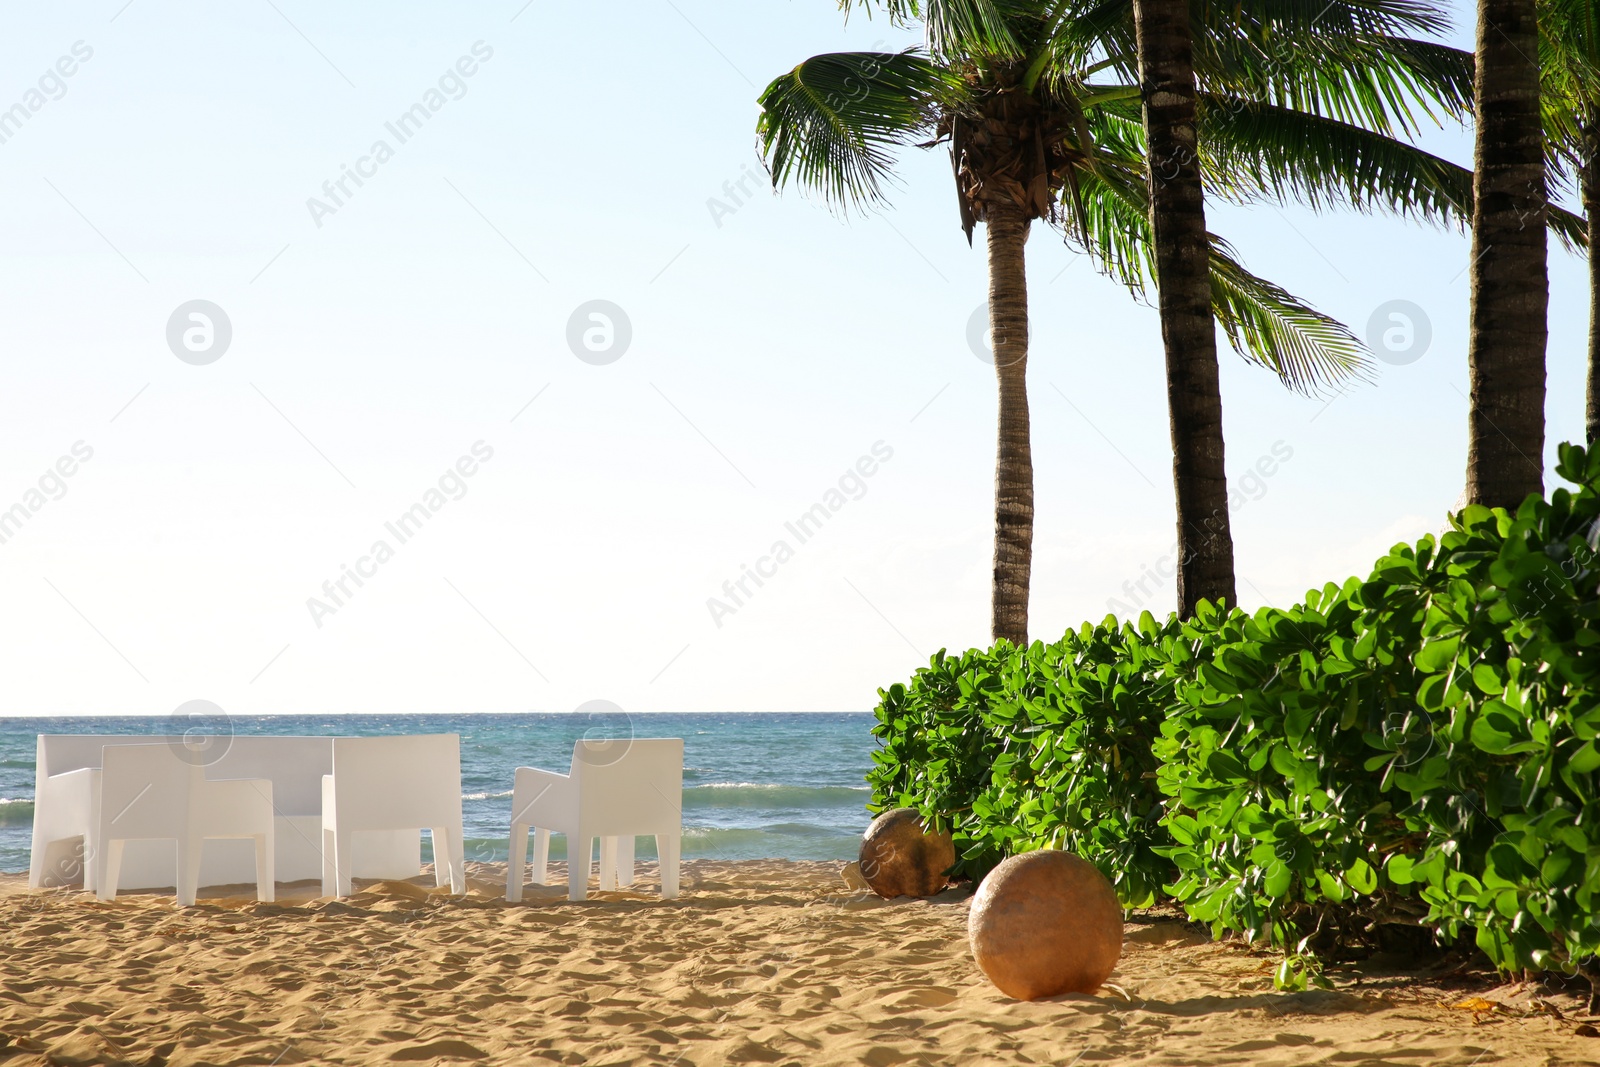 Photo of Picturesque view of sandy beach, furniture and palm trees near sea on sunny day